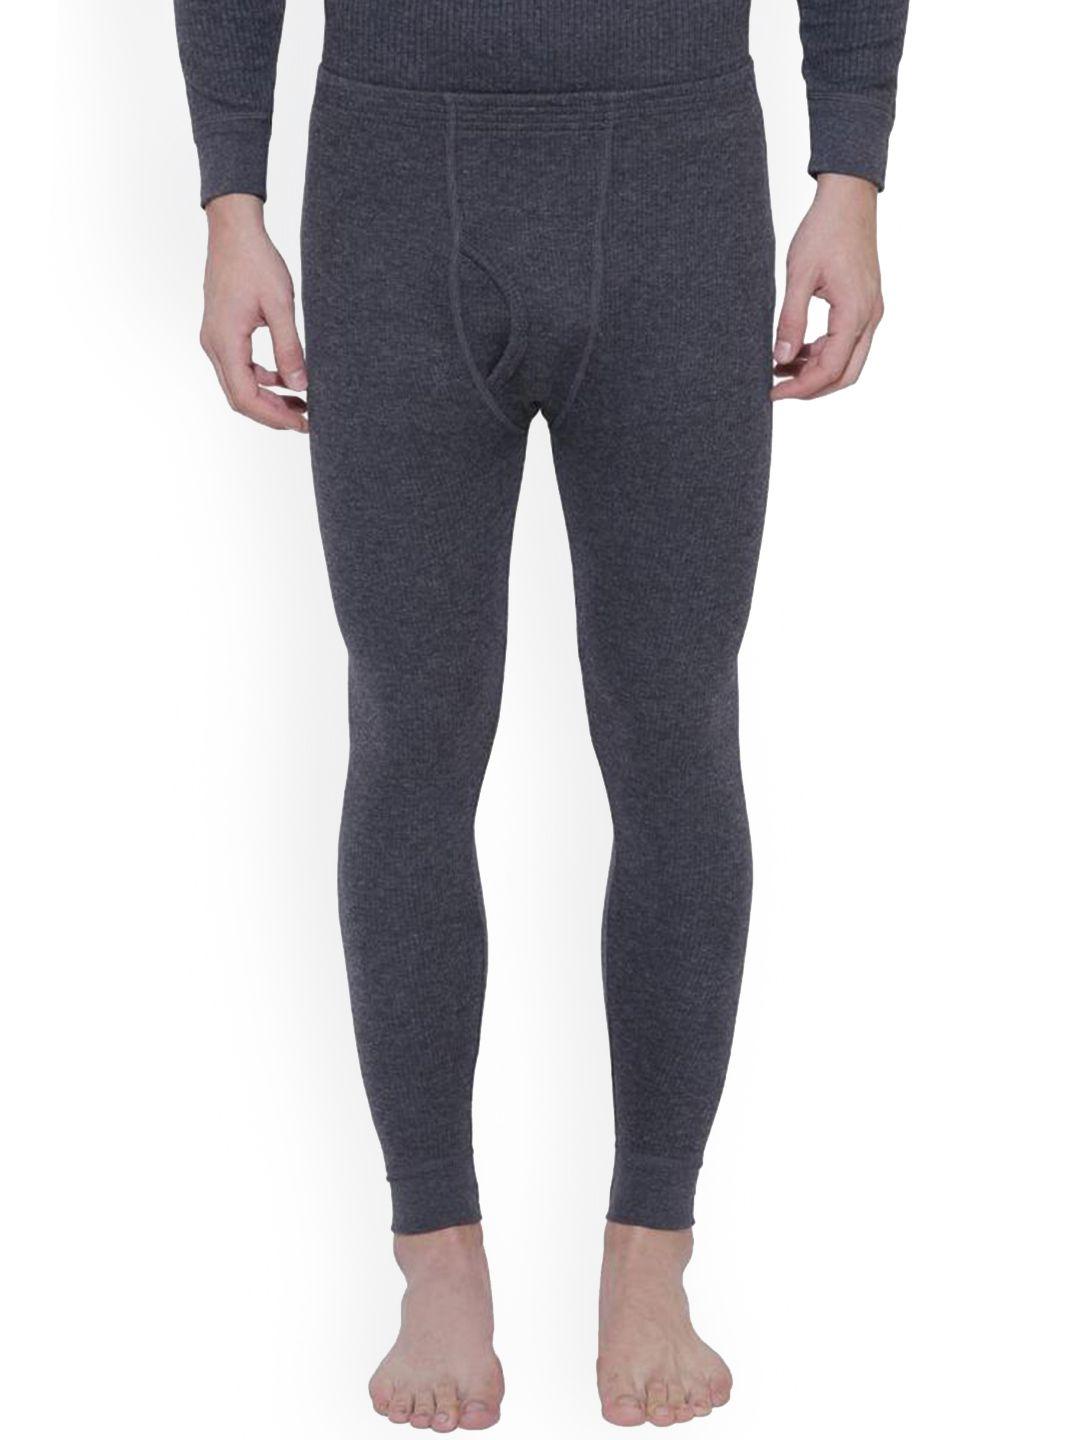 dyca-men-wool-super-stretchable-thermal-bottoms